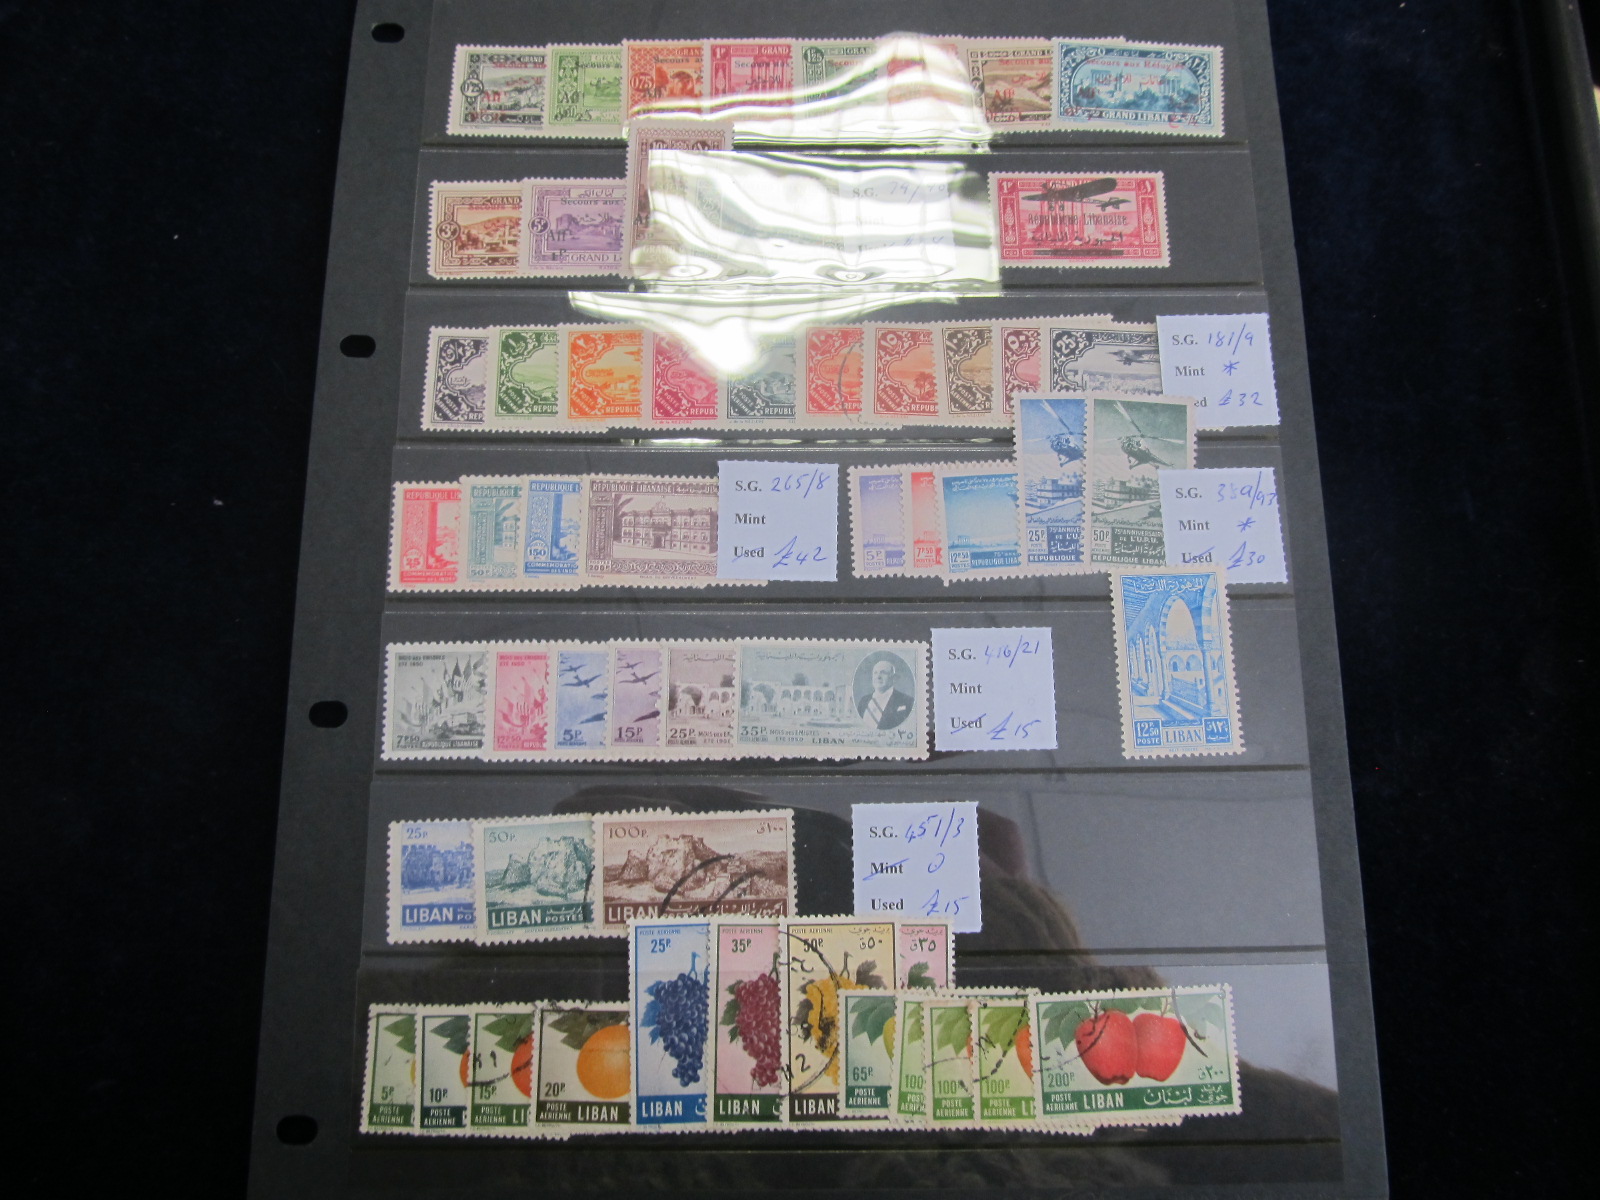 Lebanon range of mainly early mint and fine used sets on hagner pages, cat £200 approx